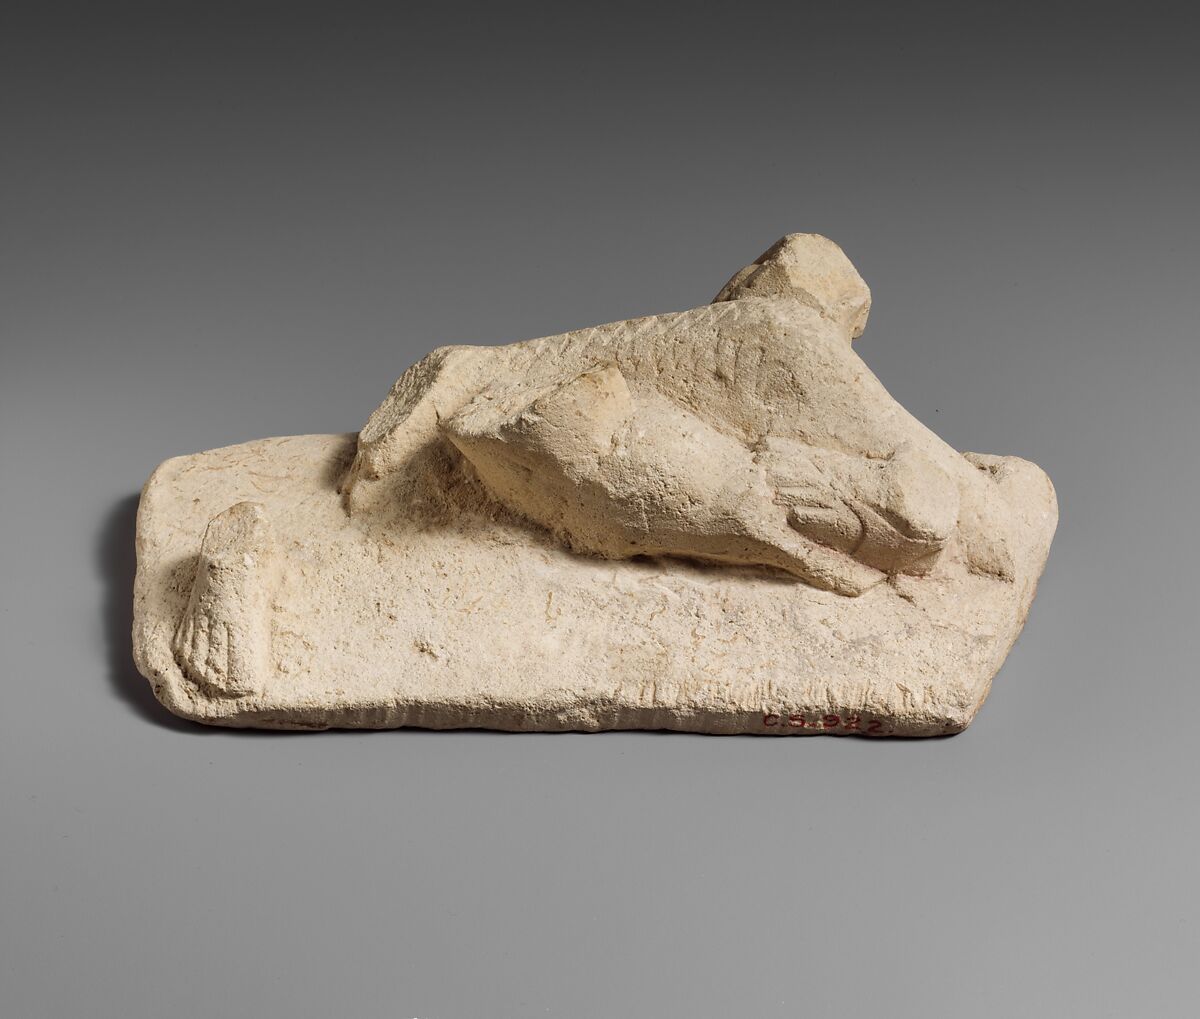 Fragment of a limestone group of Herakles, Iolaos, and the Hydra, Limestone, Cypriot 